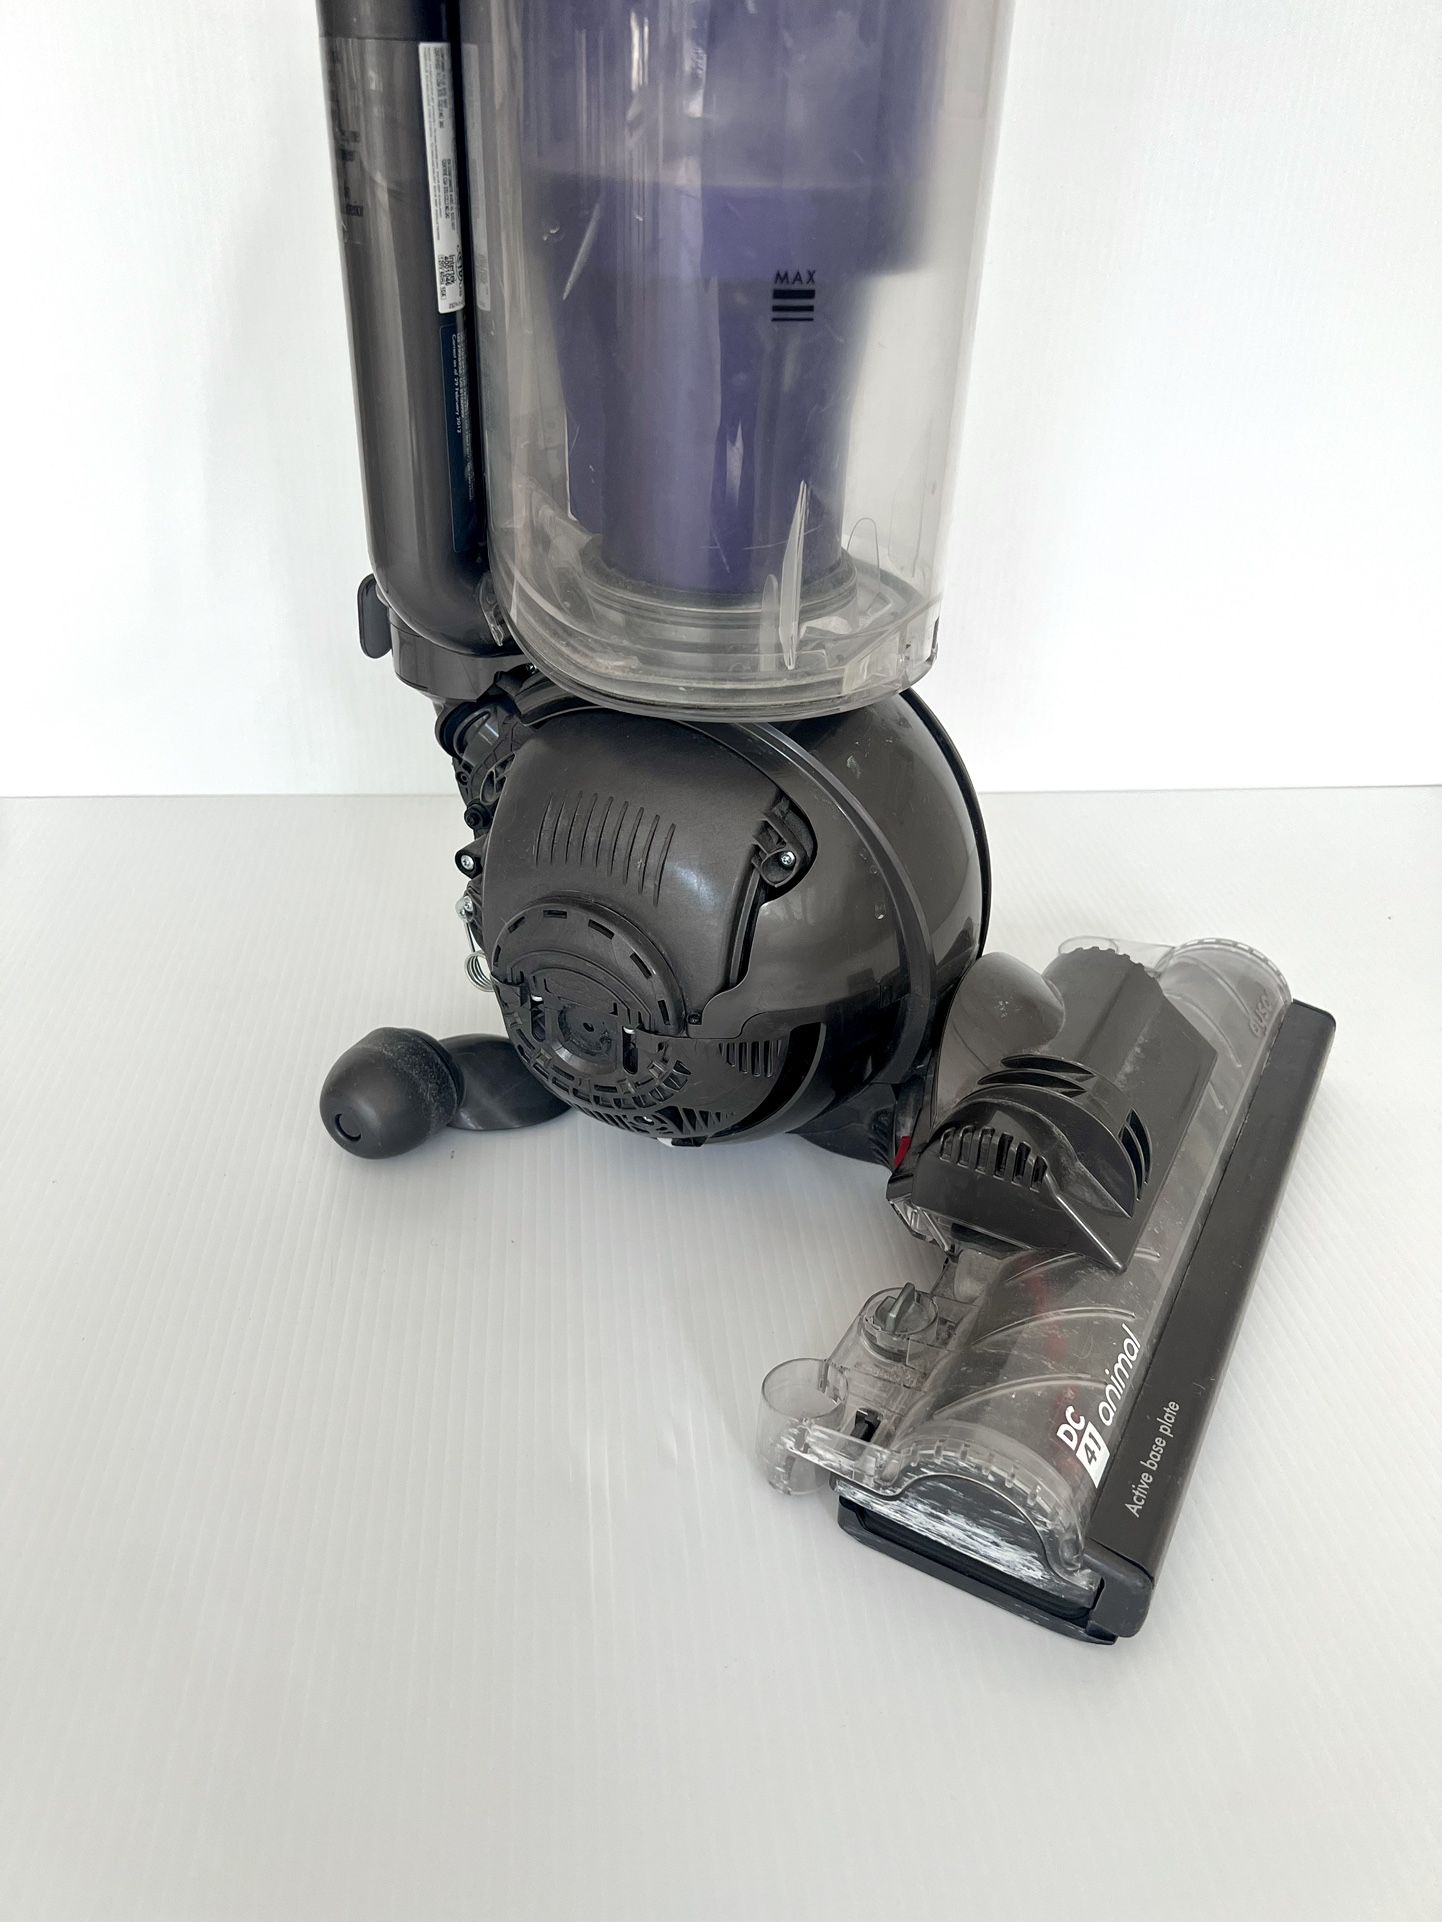  Dyson DC41 animal  With Radial root cyclone technology 